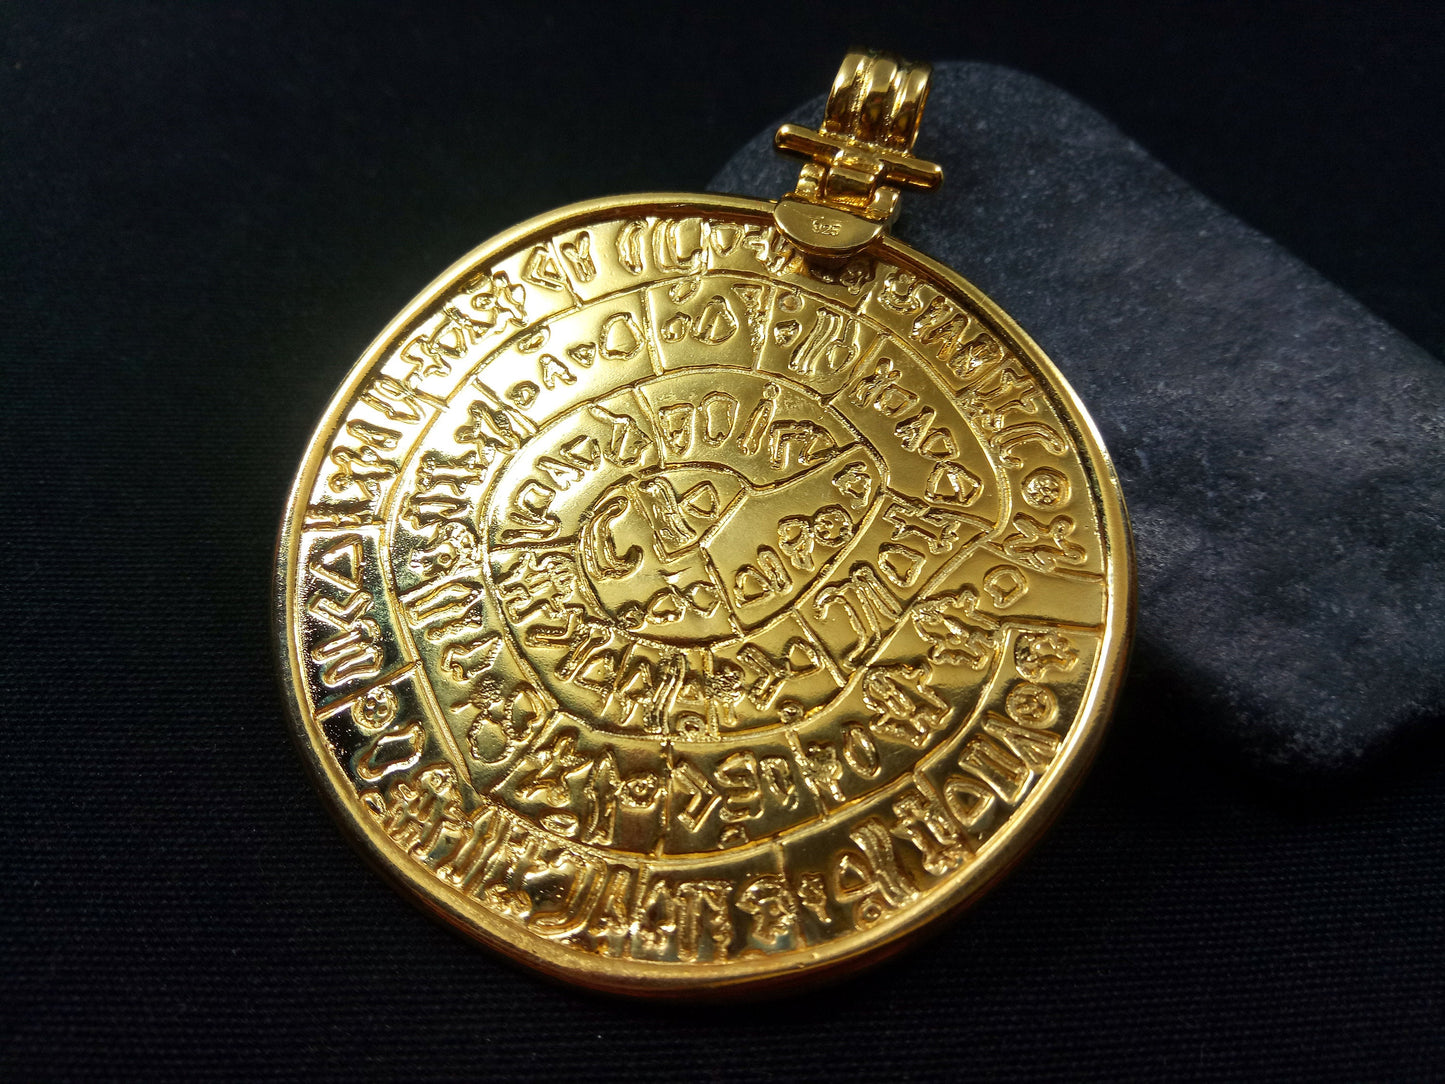 An intricate Phaistos Disc pendant in sterling silver with gold plating, measuring 54mm in diameter, a symbol of ancient Minoan civilization and Greek craftsmanship.